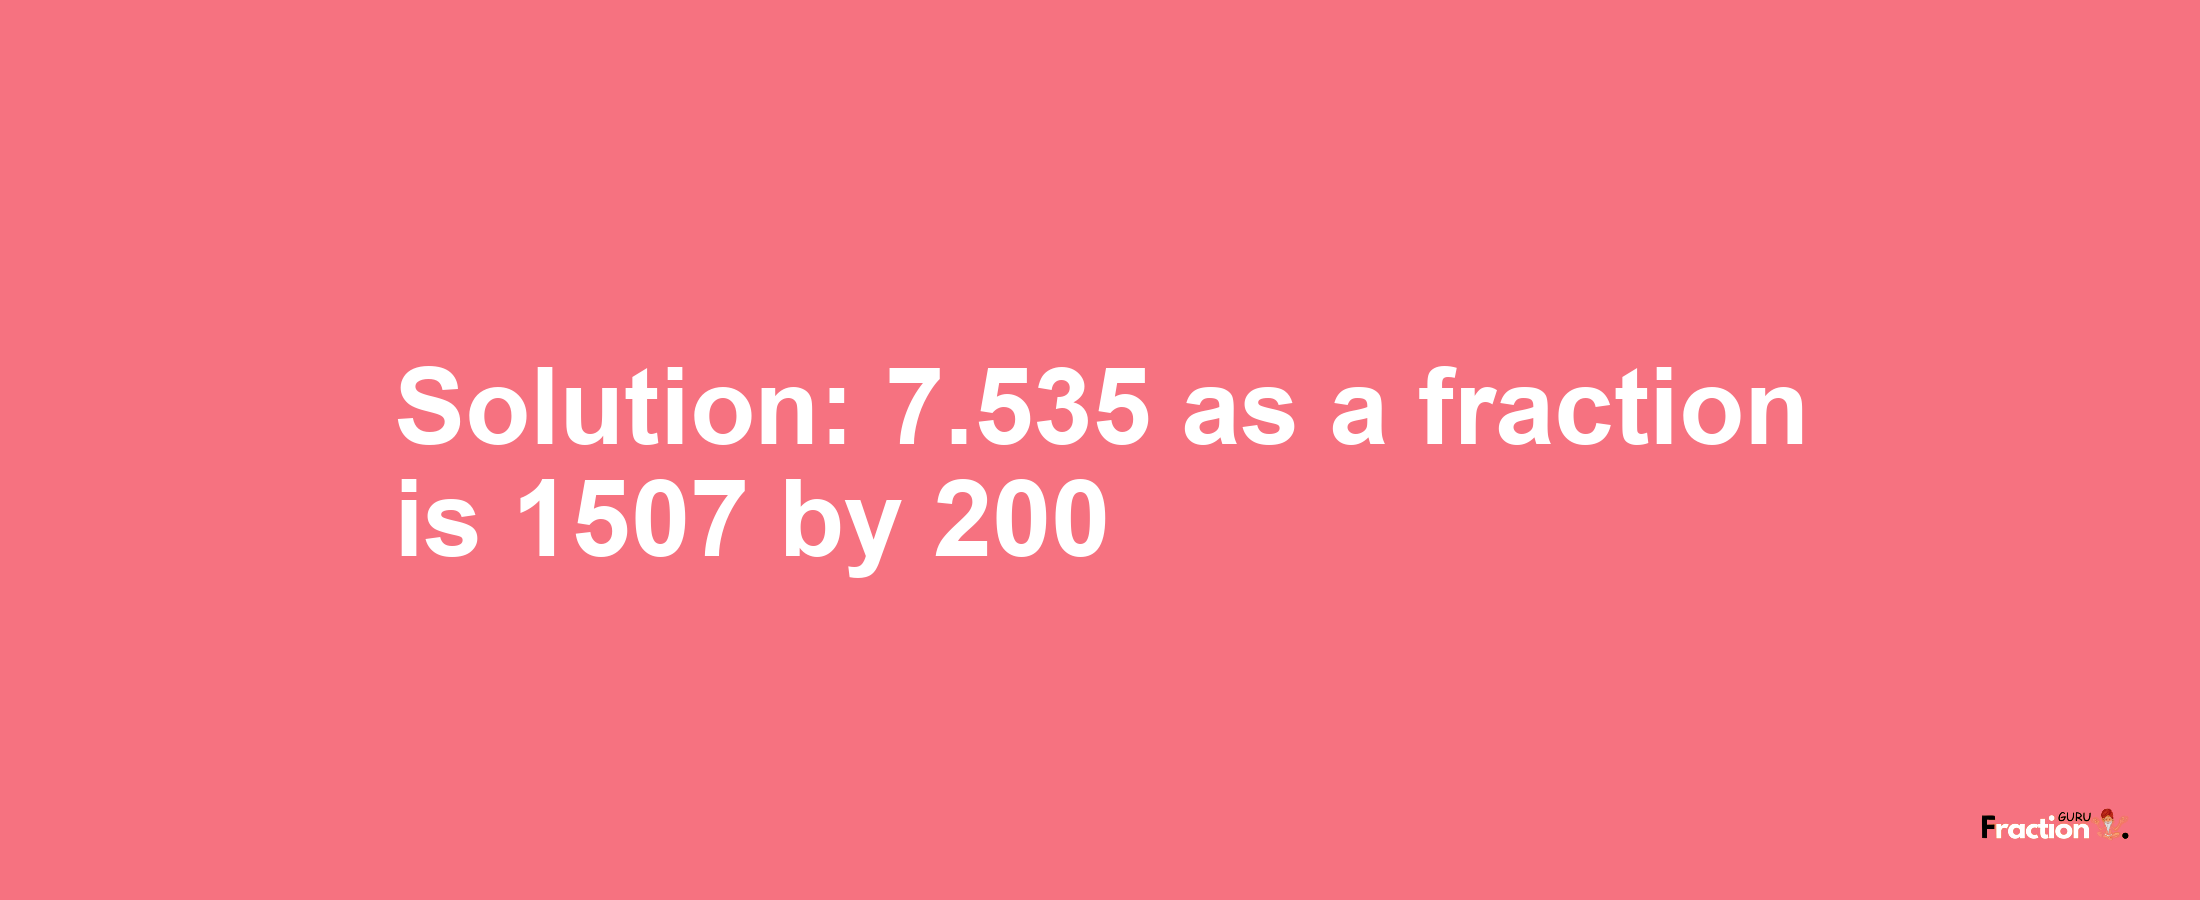 Solution:7.535 as a fraction is 1507/200